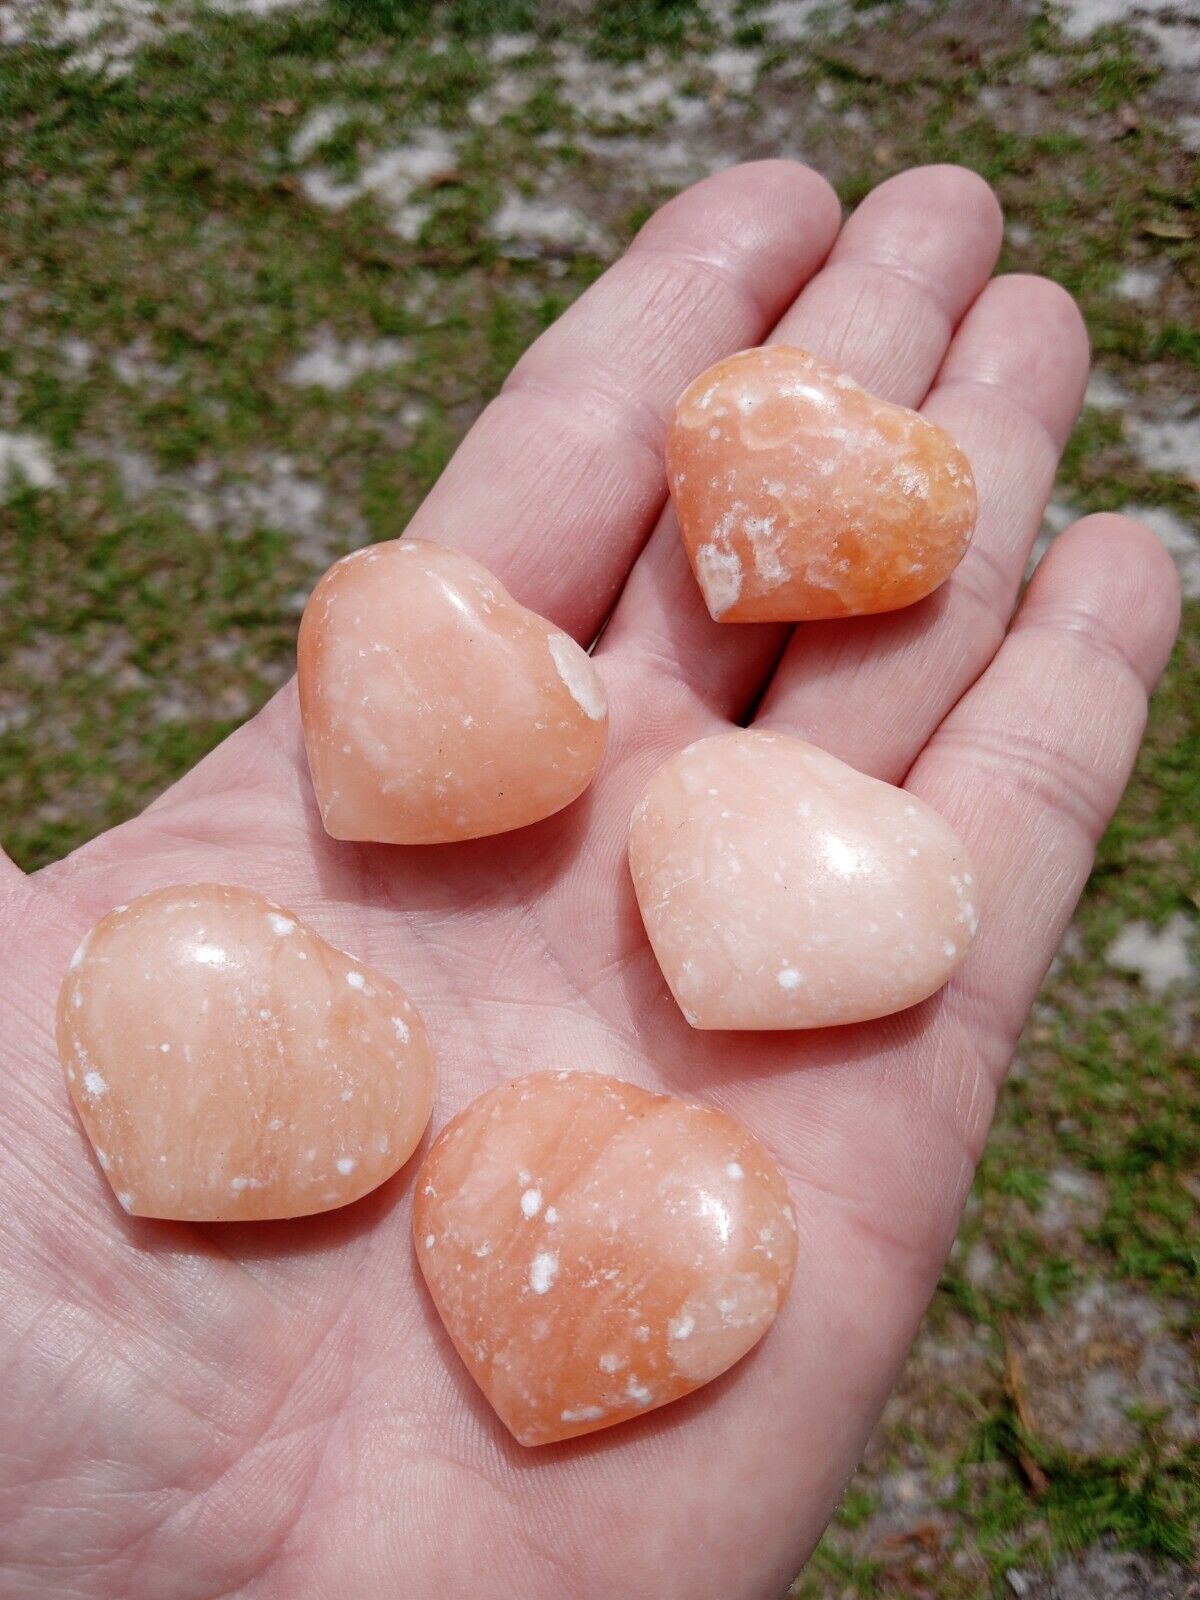 Lot of 5 Stunning Small Polished Orange Calcite 💕 Hearts Mineral Specimens C5